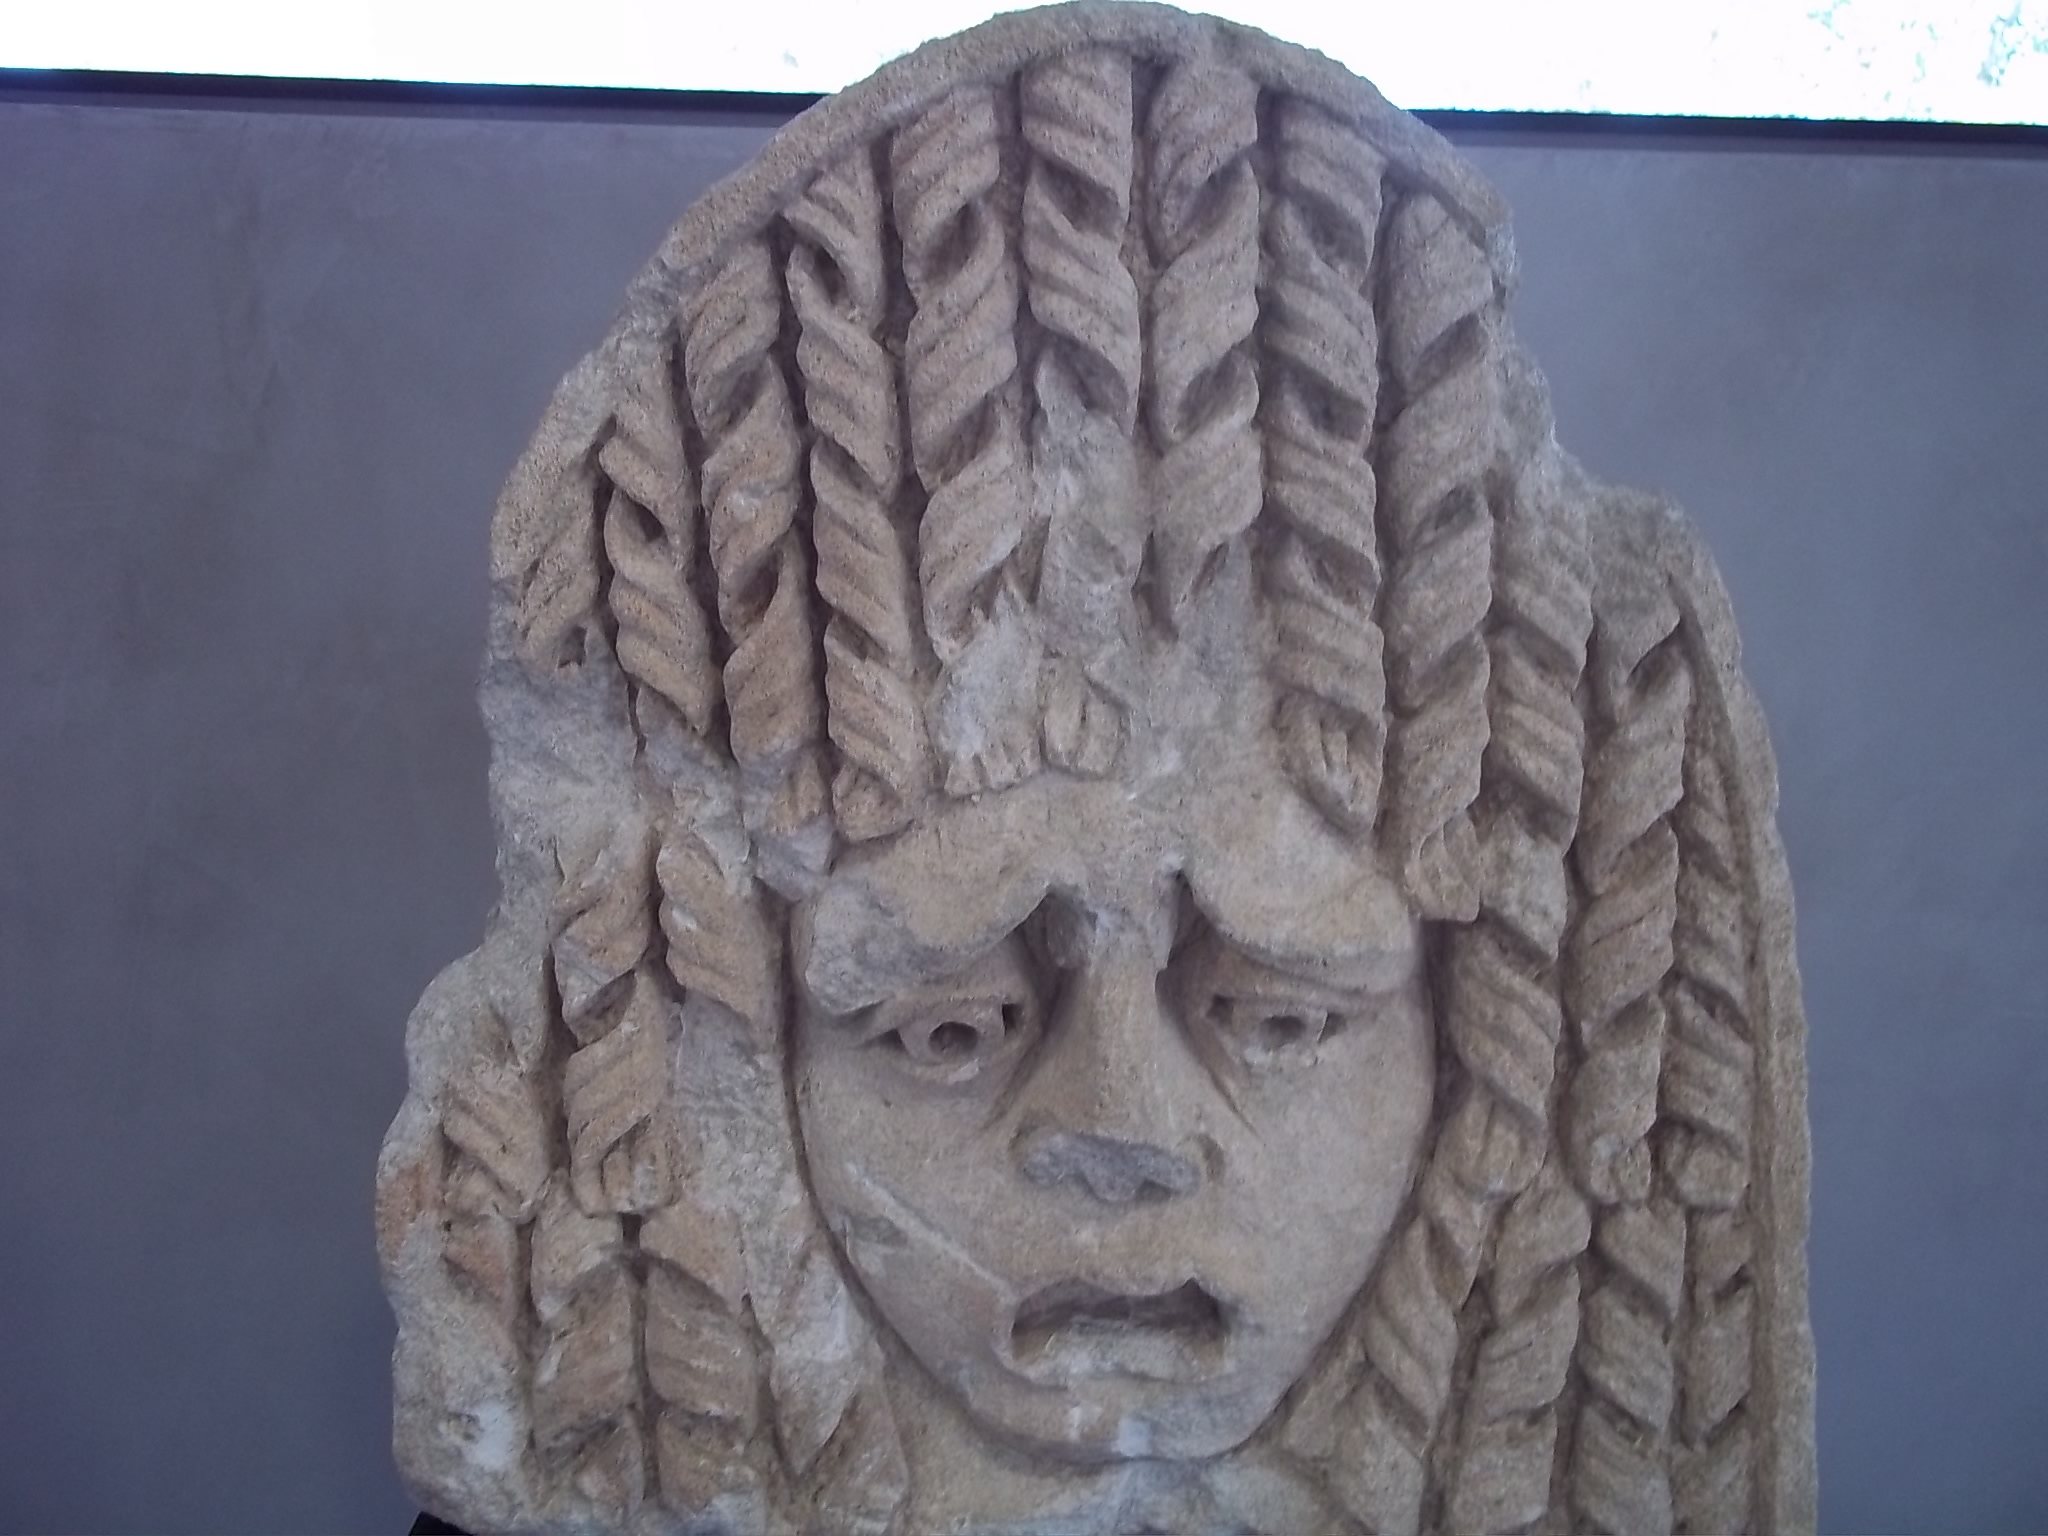 this is an image of a statue with long hair